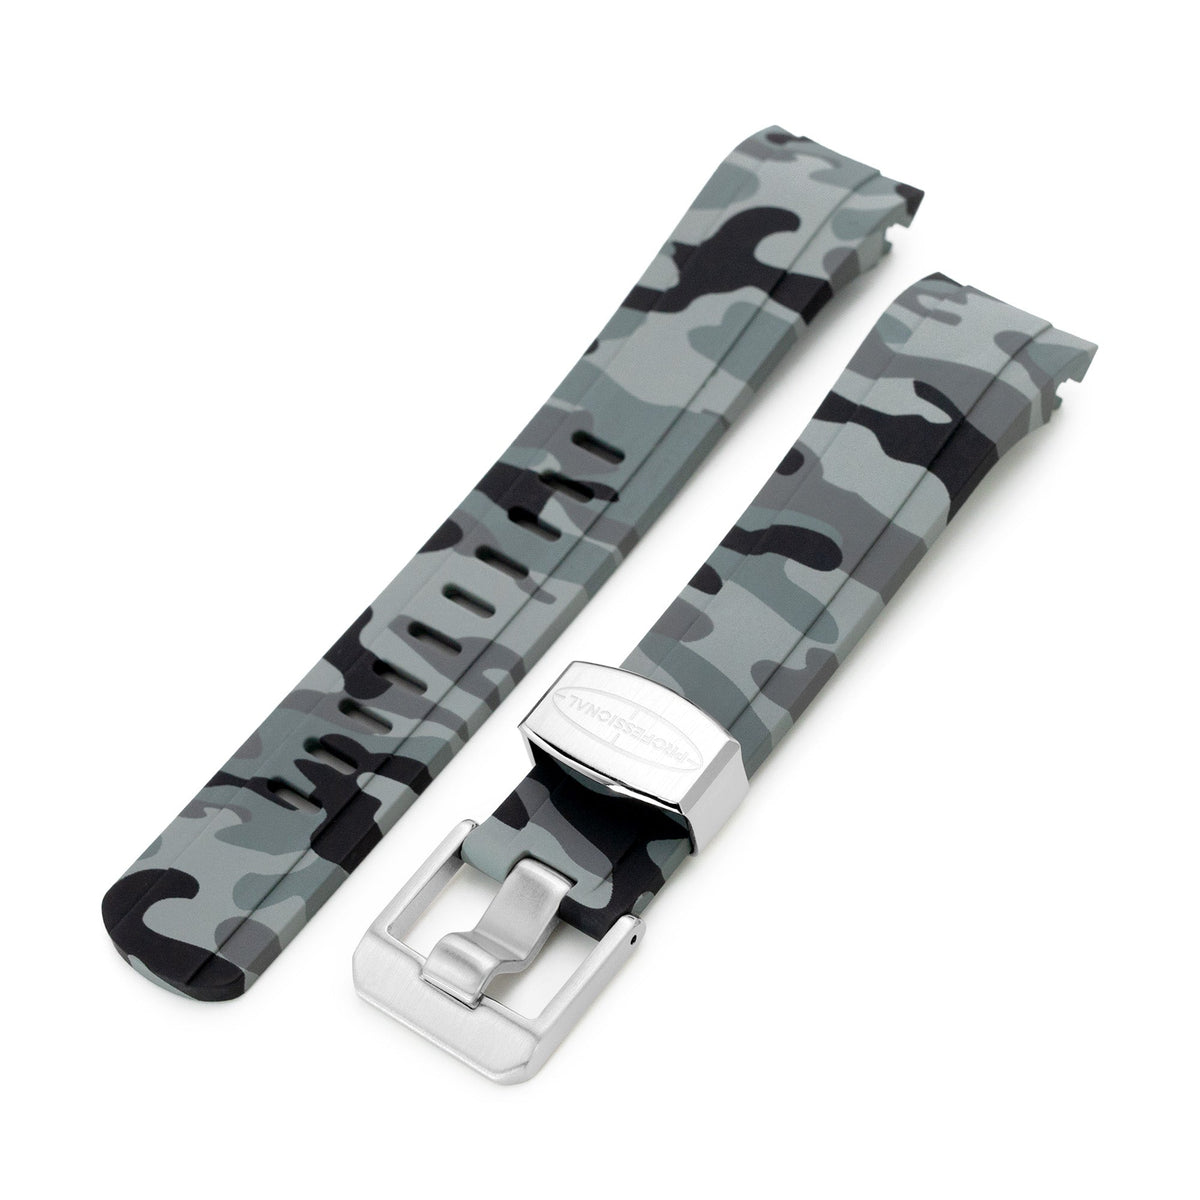 22mm Crafter Blue - CB10 Navy Camouflage Rubber Curved Lug Watch Band for Seiko 5 Strapcode Watch Bands